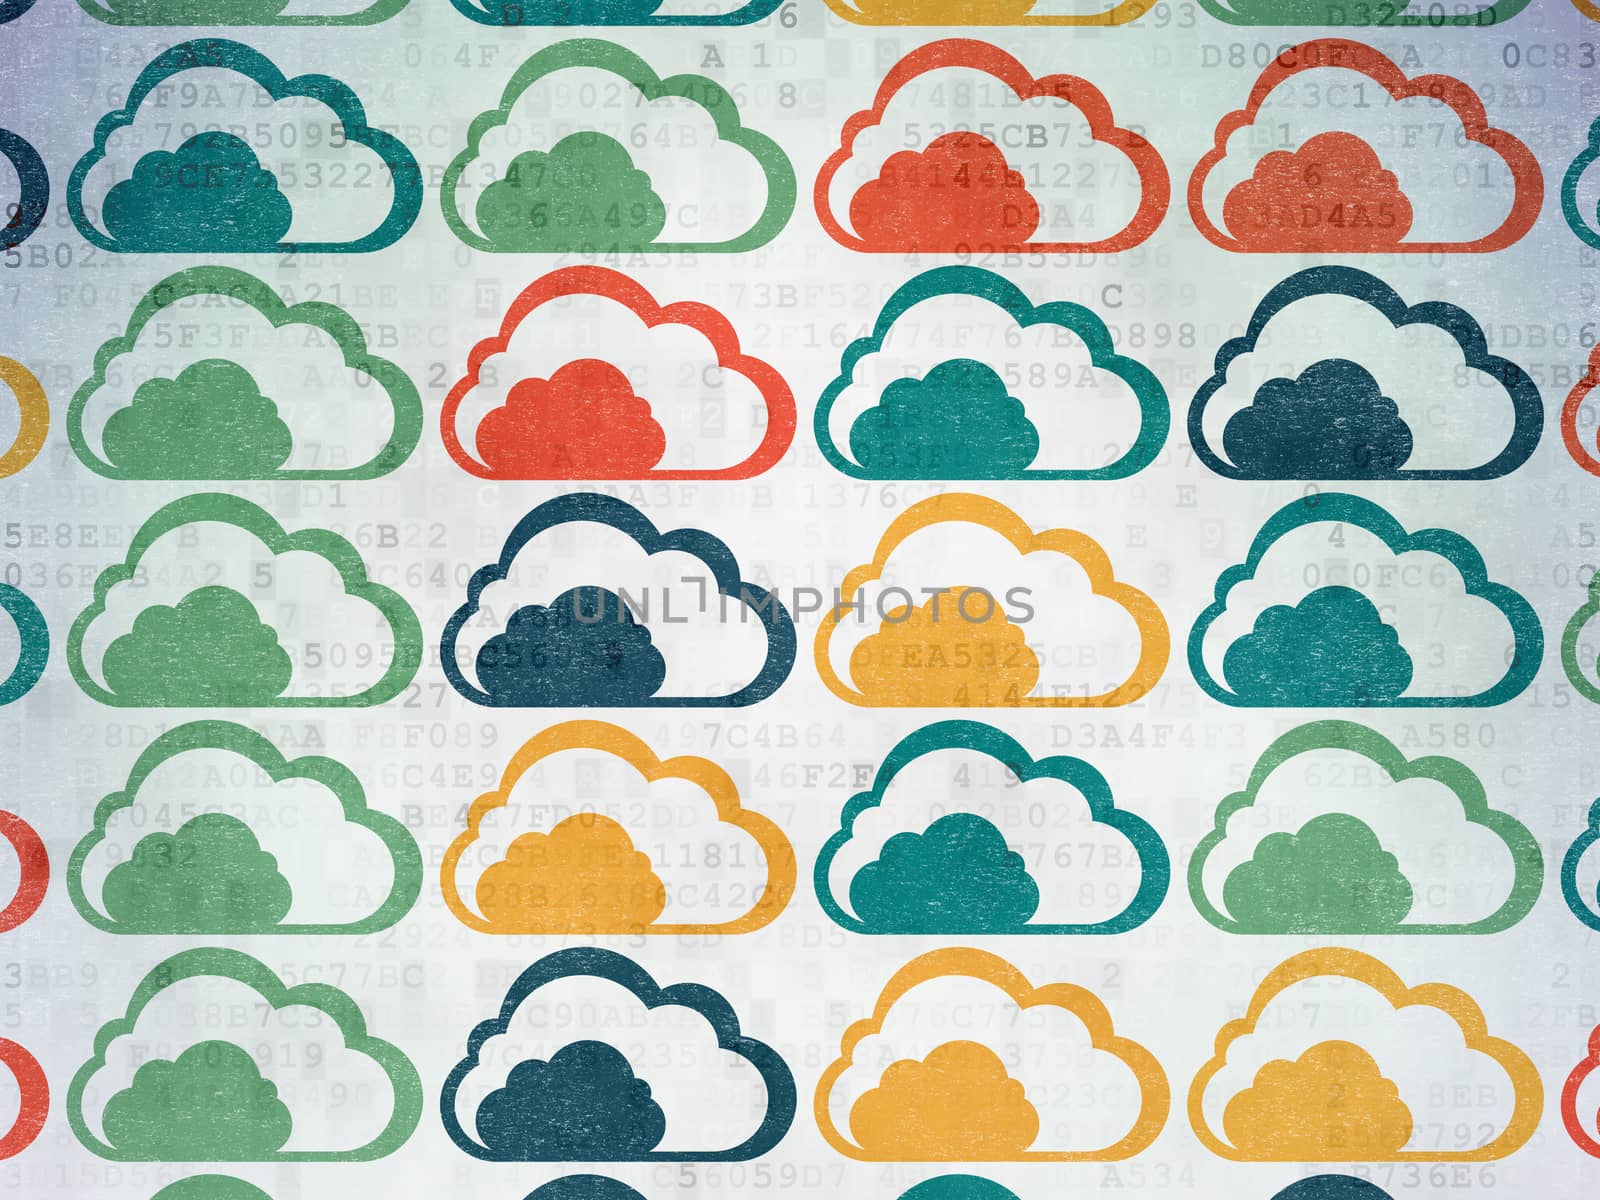 Cloud networking concept: Painted multicolor Cloud icons on Digital Paper background